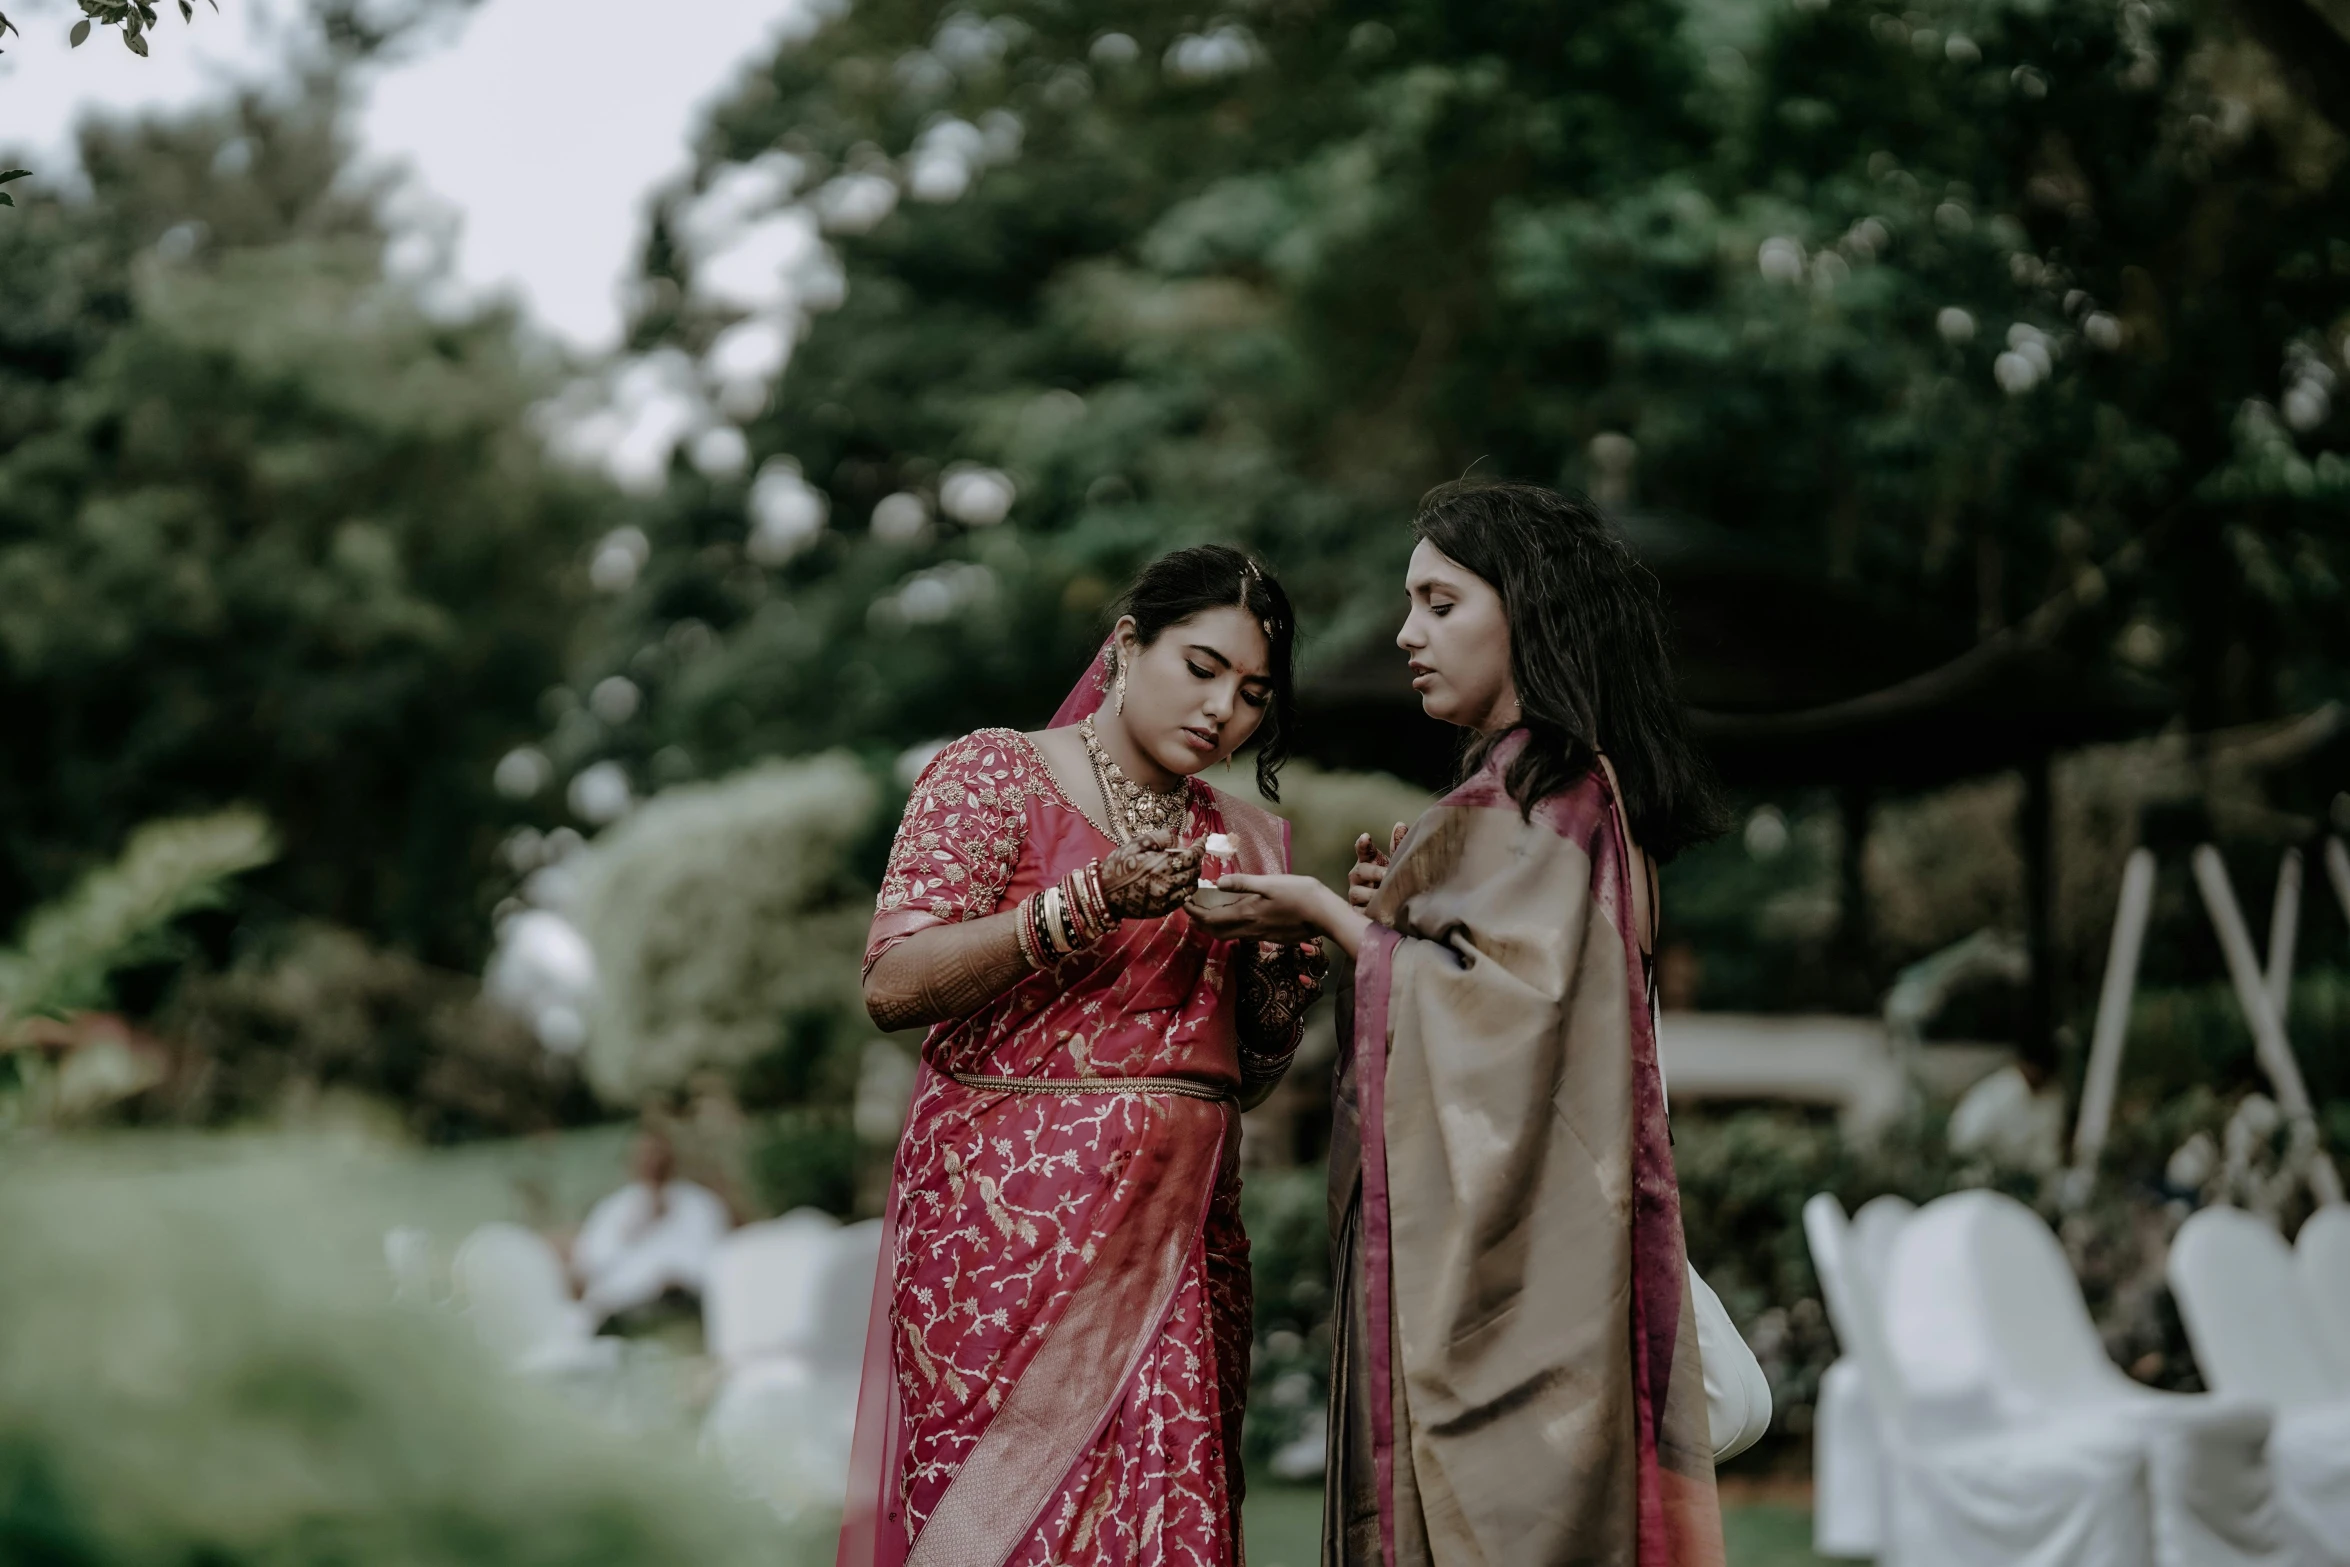 two women are in sari on their wedding day